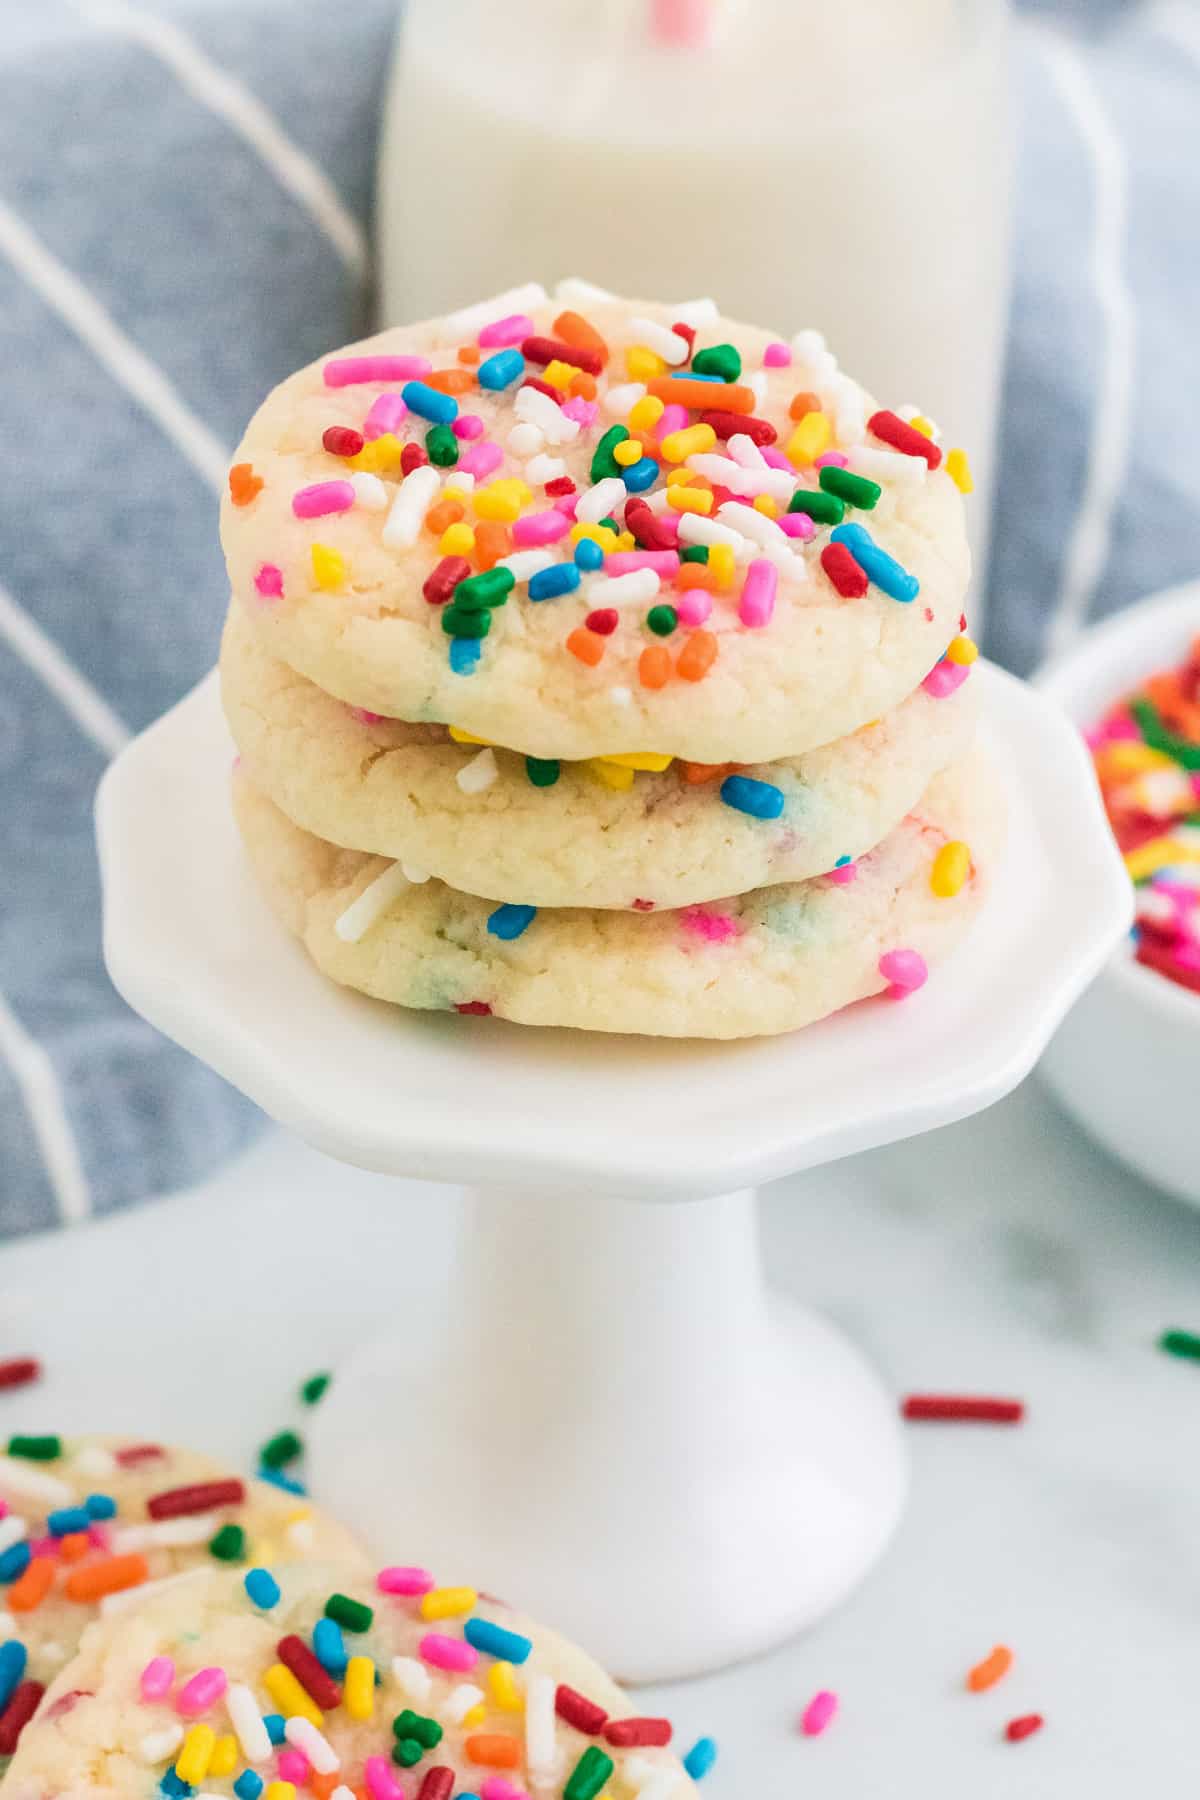 Cake mix funfetti cookies on a cupcake stand next to a cup of milk.